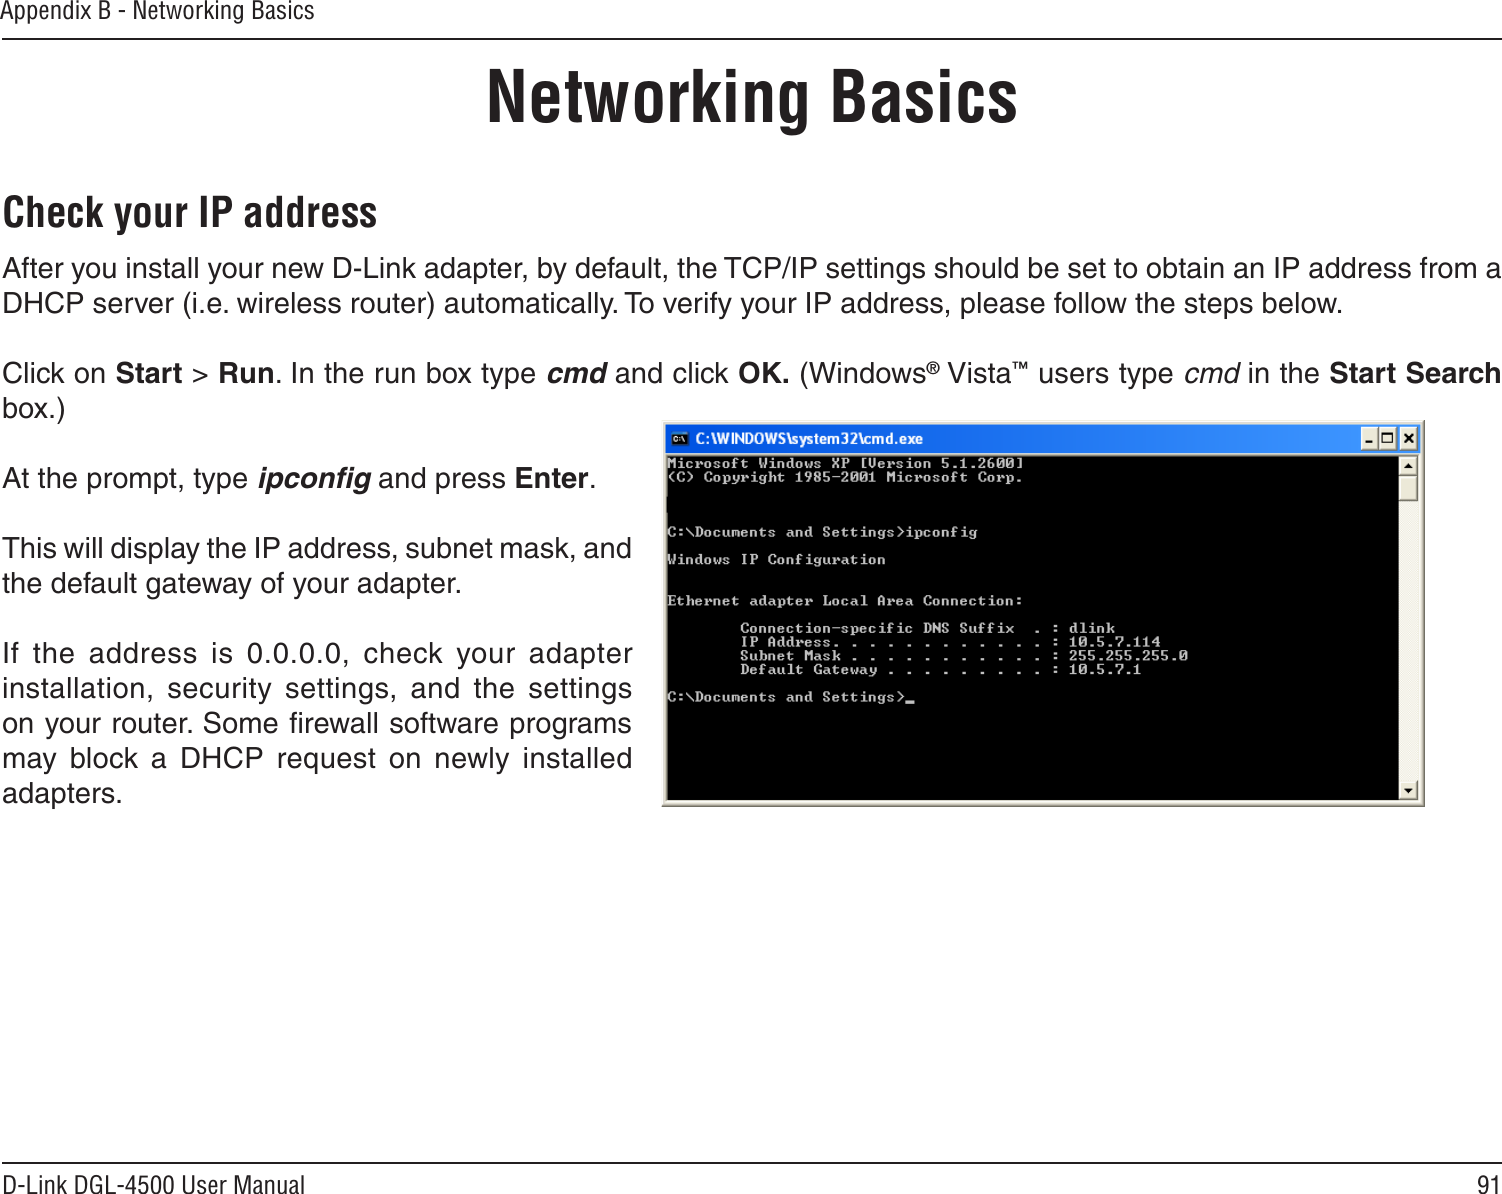 91D-Link DGL-4500 User ManualAppendix B - Networking BasicsNetworking BasicsCheck your IP addressAfter you install your new D-Link adapter, by default, the TCP/IP settings should be set to obtain an IP address from a DHCP server (i.e. wireless router) automatically. To verify your IP address, please follow the steps below.Click on Start &gt; Run. In the run box type cmd and click OK. (Windows® Vista™ users type cmd in the Start Search box.)At the prompt, type ipconﬁg and press Enter.This will display the IP address, subnet mask, and the default gateway of your adapter.If  the  address  is  0.0.0.0,  check  your  adapter installation,  security  settings,  and  the  settings on your router. Some ﬁrewall software programs may  block  a  DHCP  request  on  newly  installed adapters. 